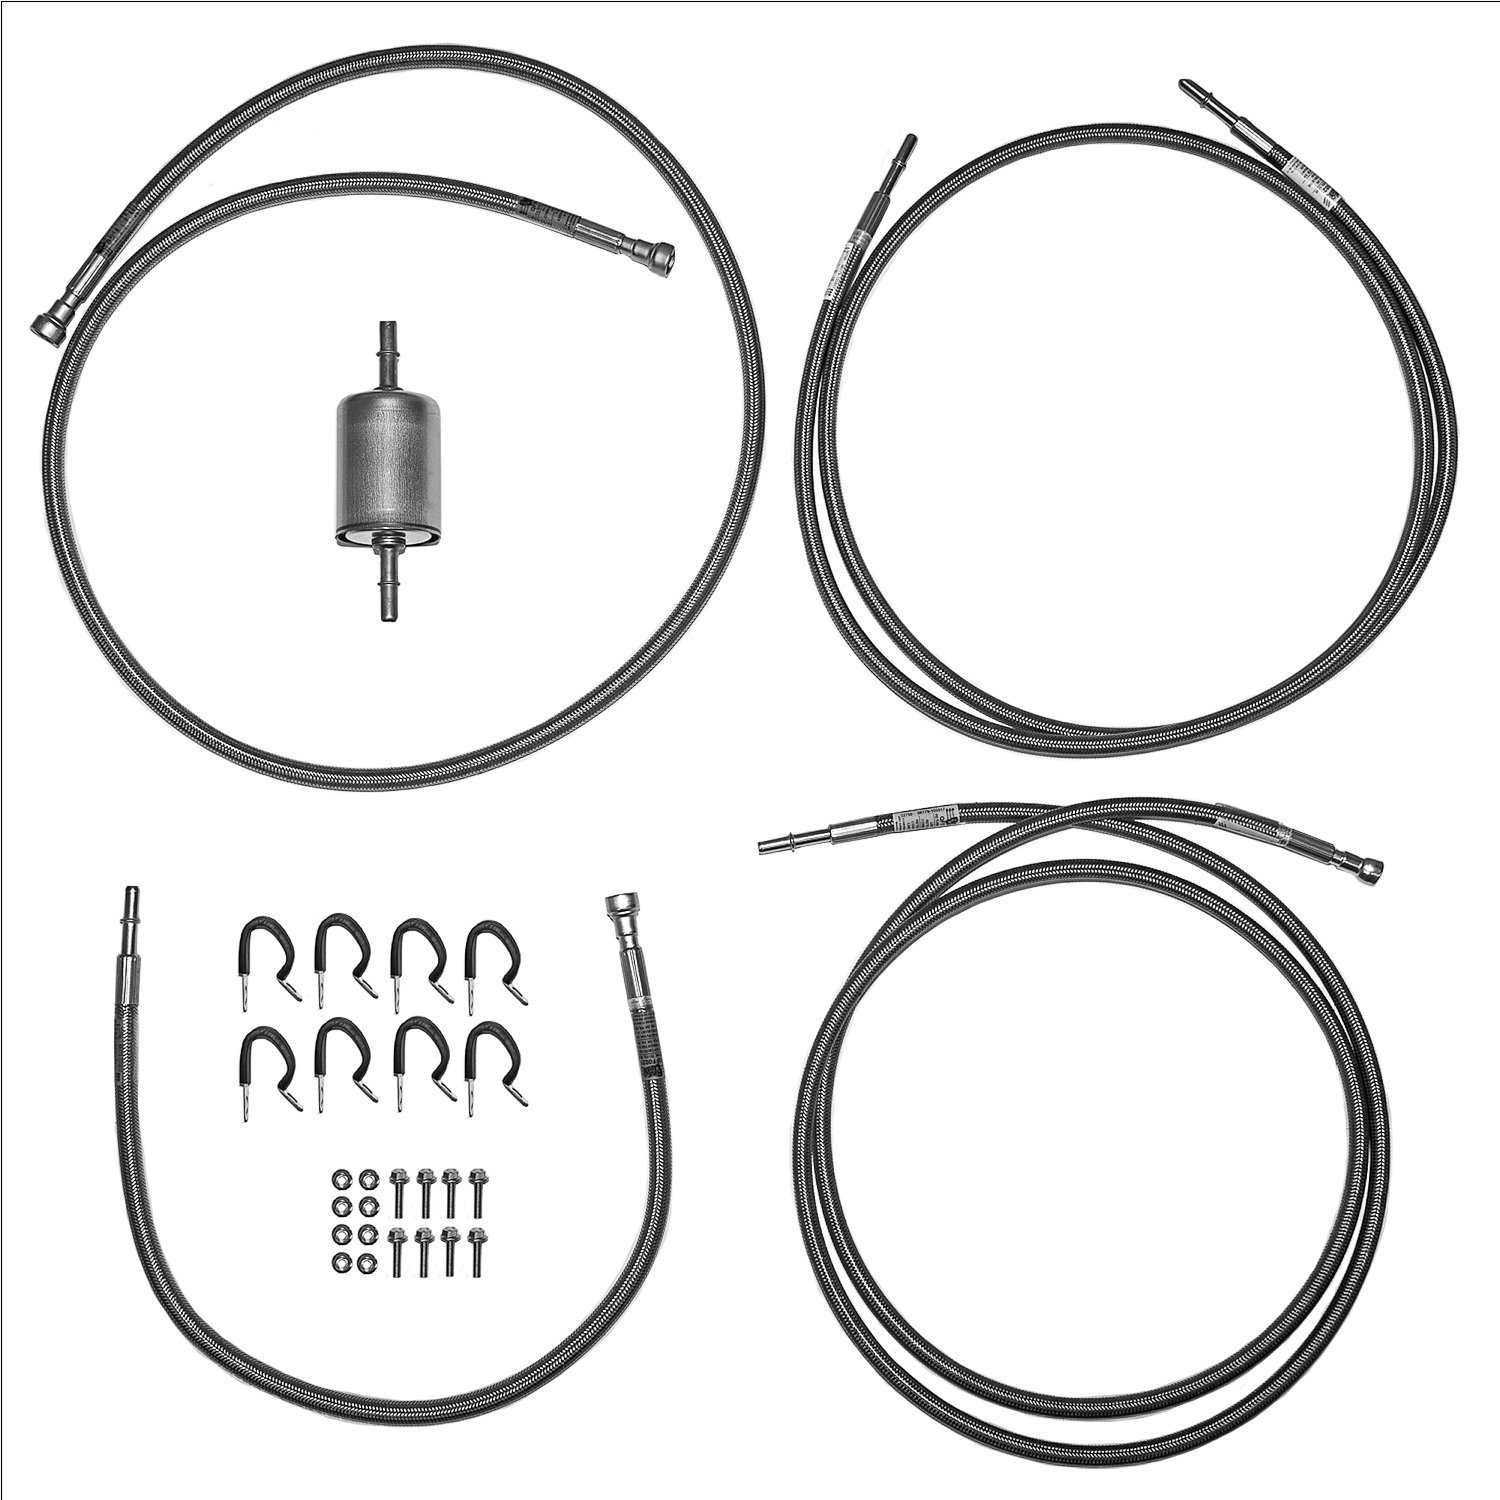 Quick-Fix Complete Fuel Line Kit for 1999-2003 Chevy Silverado 1500, GMC Sierra 1500 Regular Cab Trucks w/V8 [Braided Stainless]